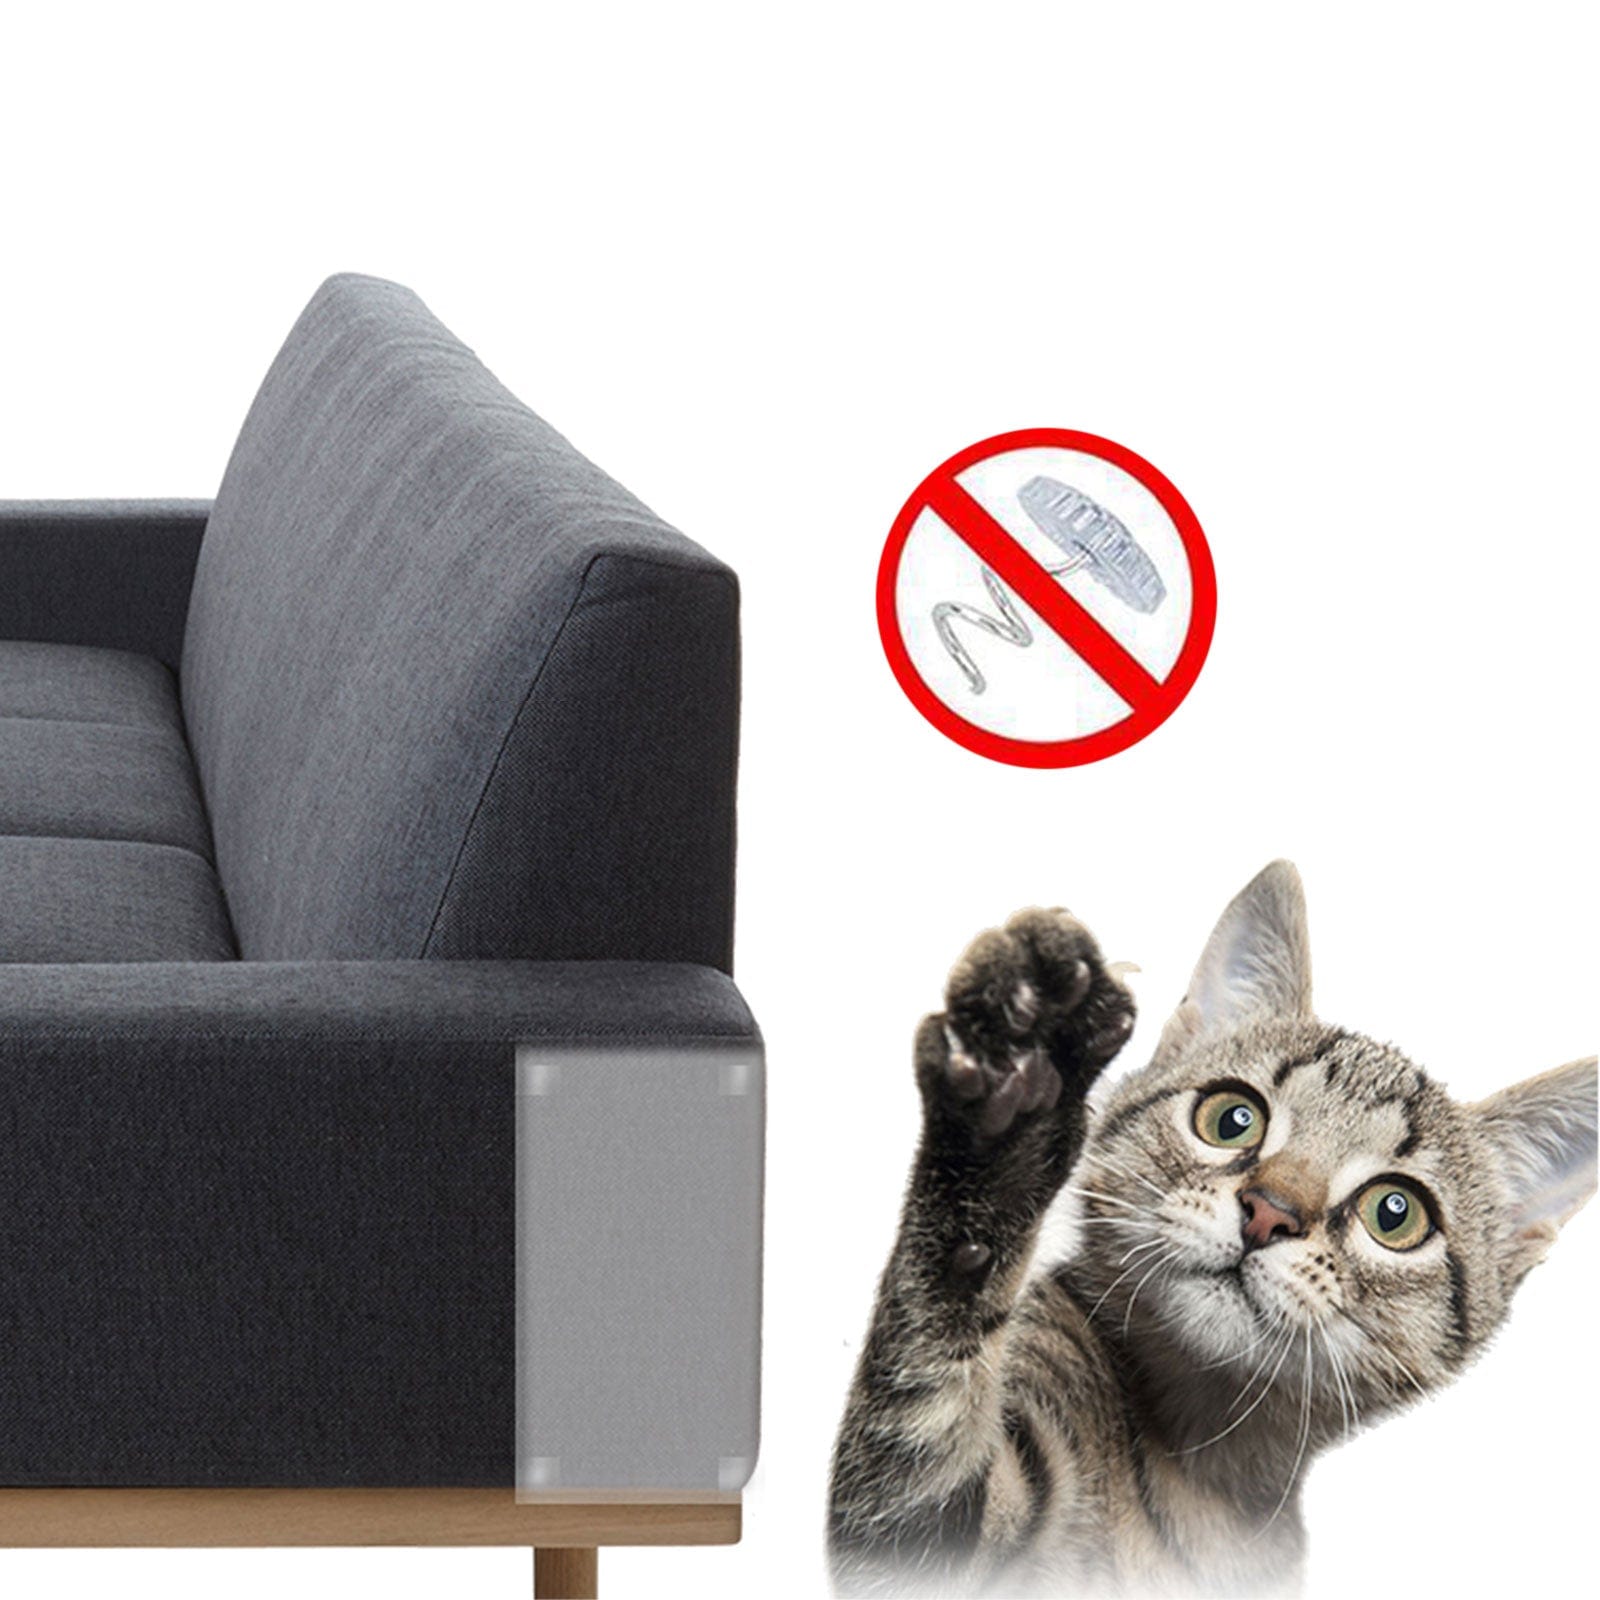 2 PCS Furniture Protectors from Cats, Stop Cat Scratching Couch, Door & Other Furniture and Car Seat, Self-Adhesive Flexible Vinyl Sheet, Pet Scratch Deterrent for Furniture (5.5 *18.11 Inch)